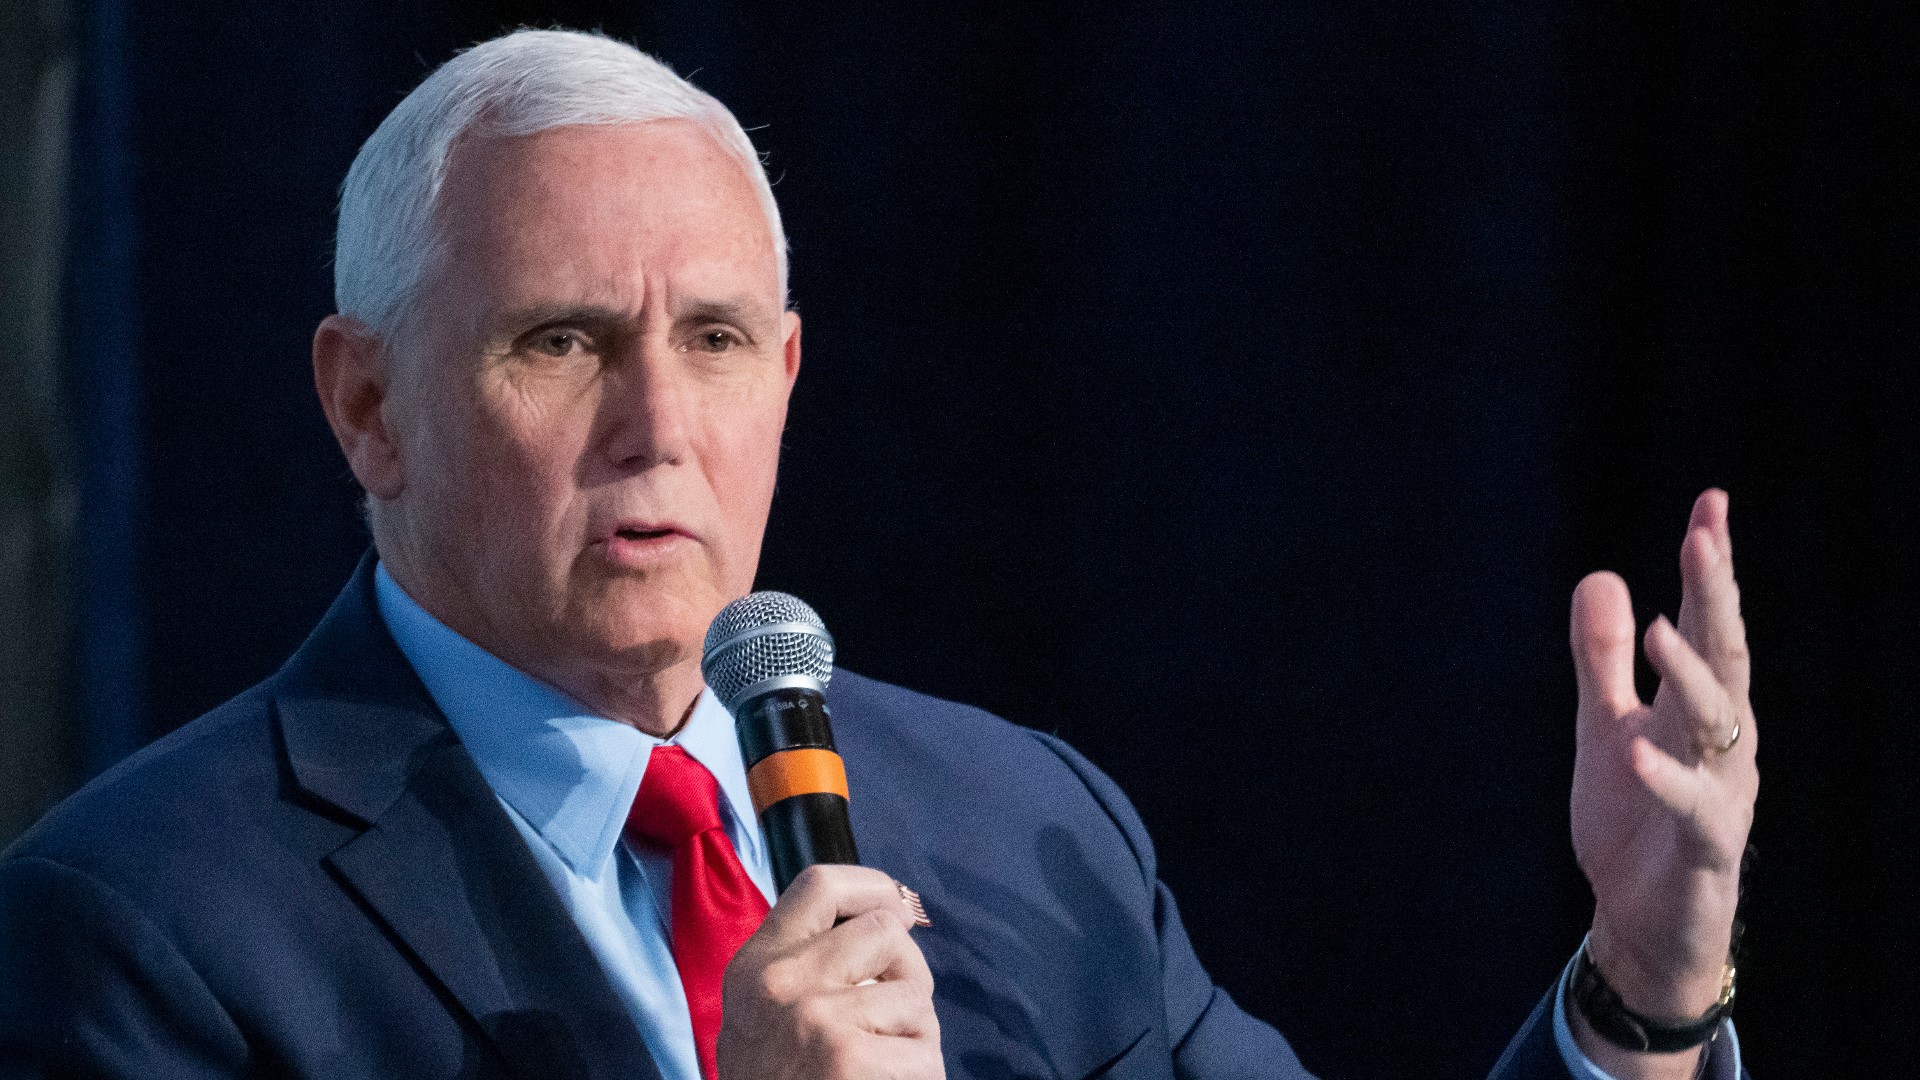 The campaign is expected to lean heavily on town halls and retail stops aimed at showcasing Pence's personality.